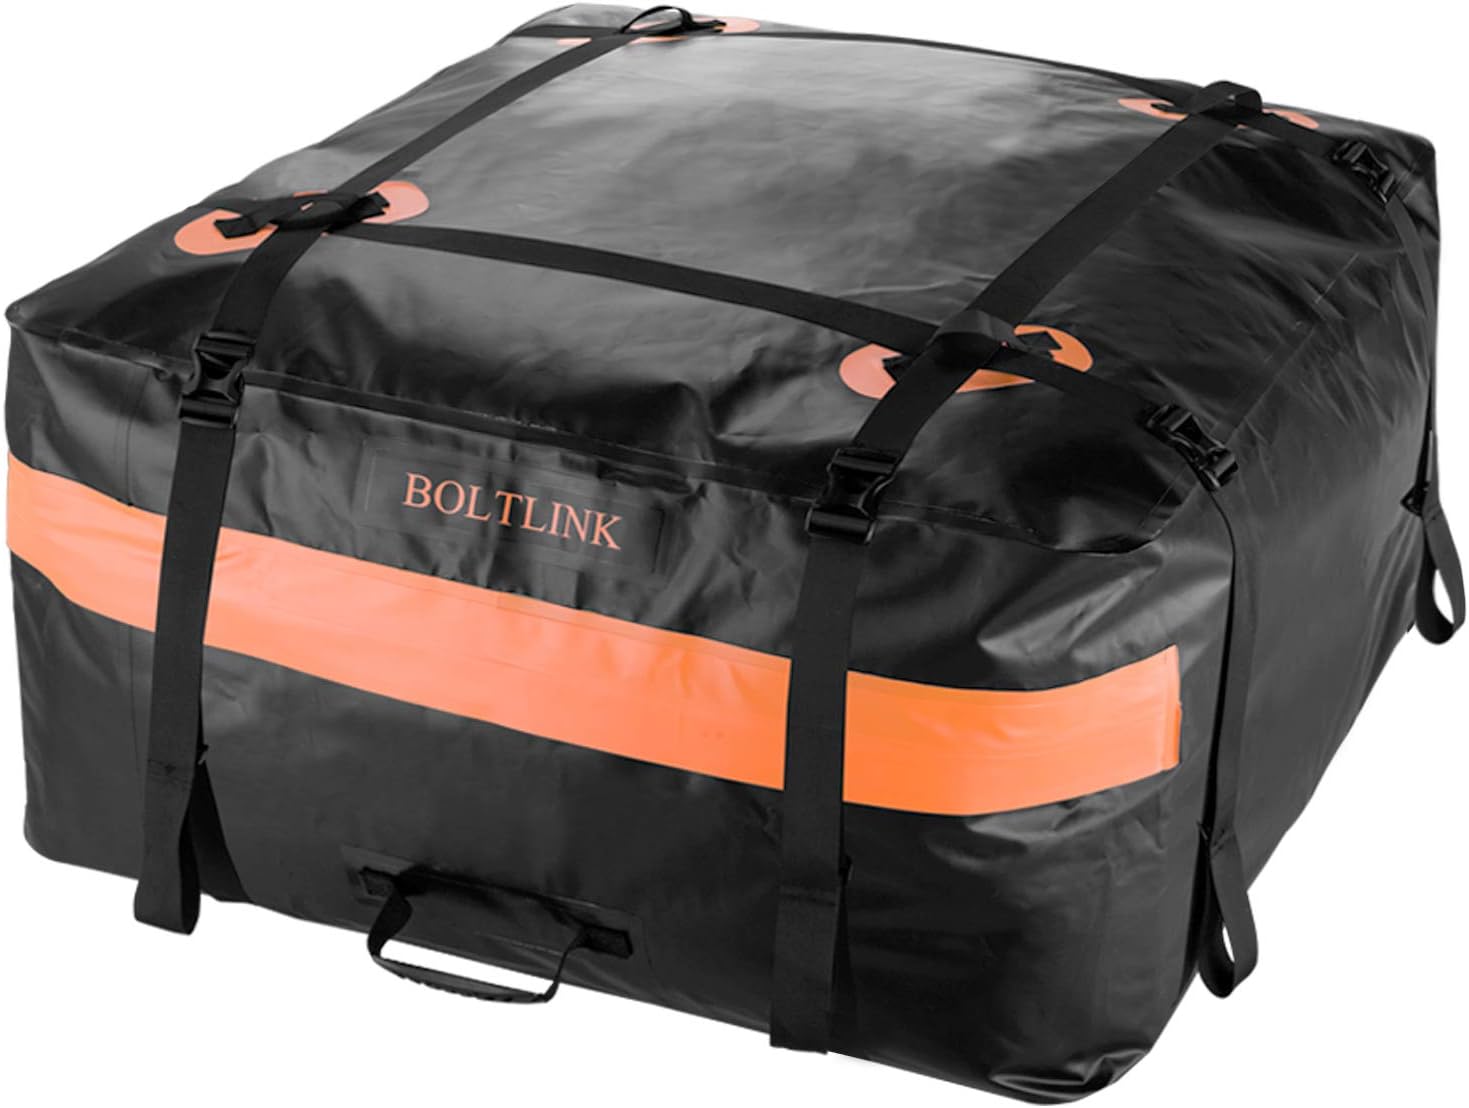  Boltlink Car Roof Top Cargo Carrier Bag Made With, cargo bag without roof rack